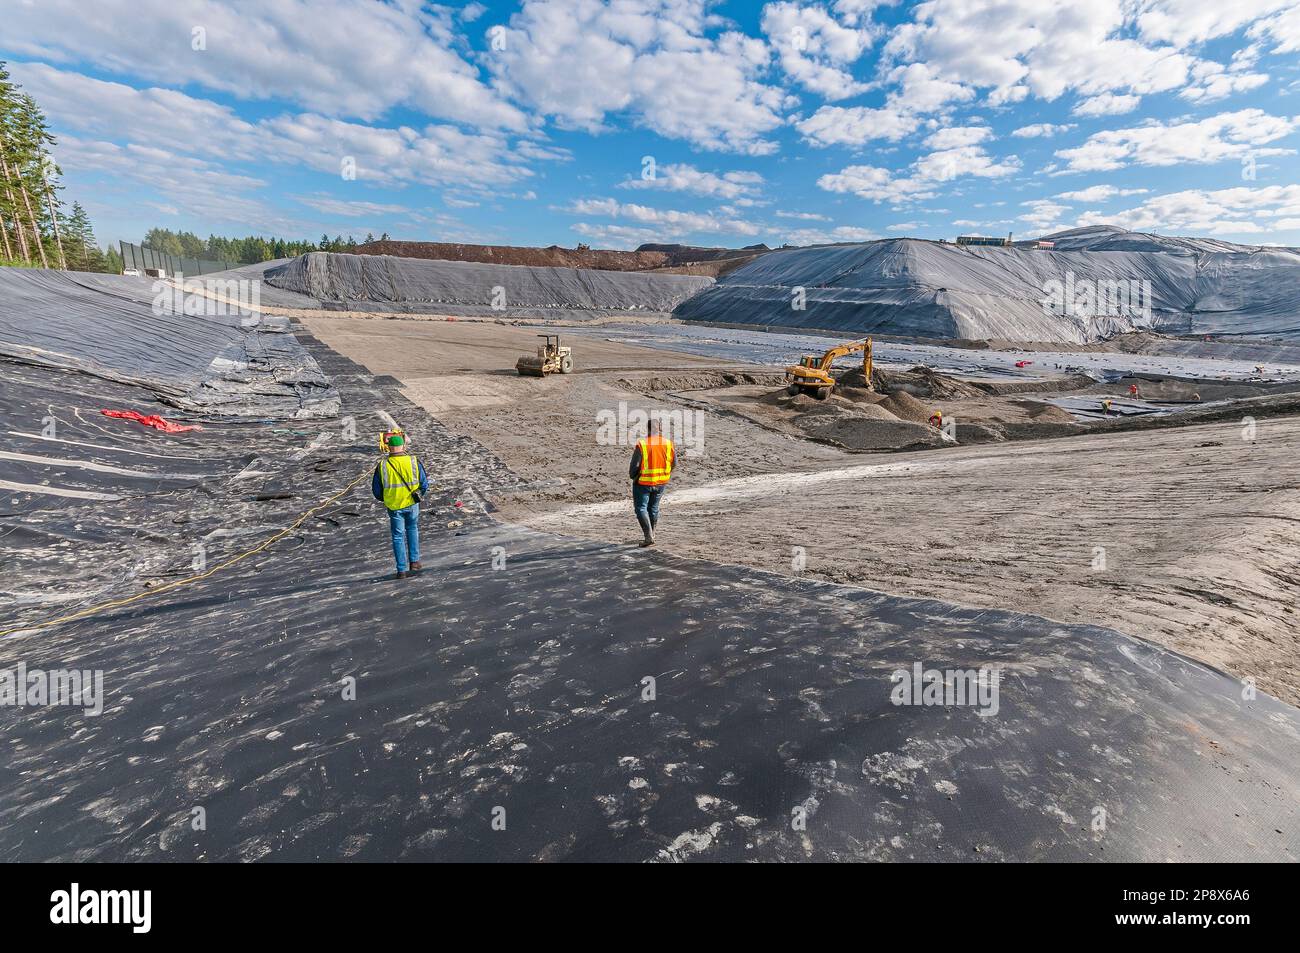 Workers and equipment in vast areas of excavation and plastic geomembrane coverings at an active landfill. Stock Photo